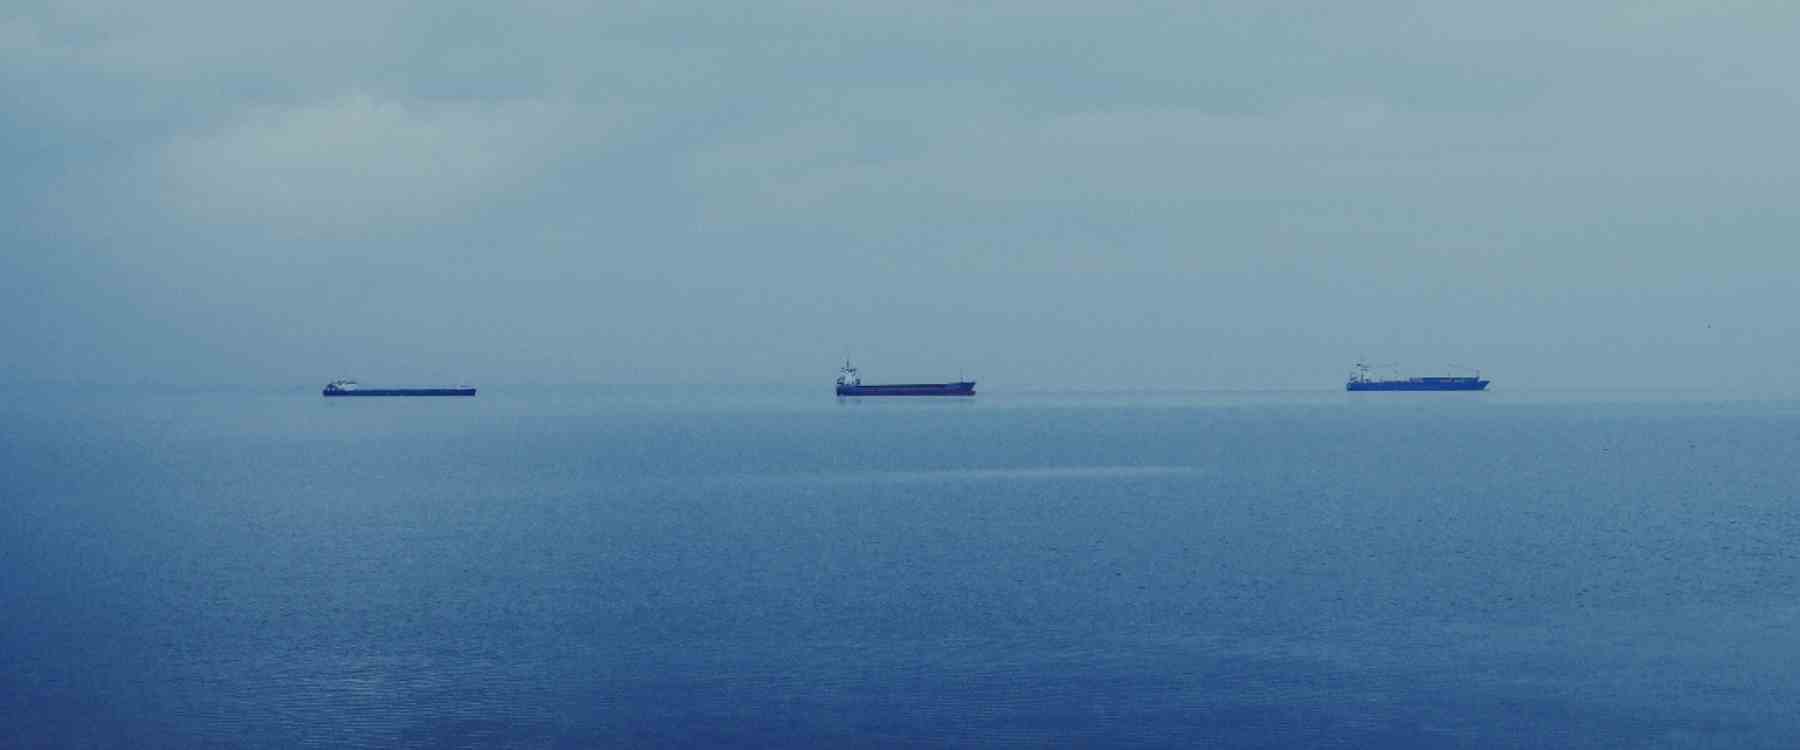 Three cargo ships on the sea in the distance)